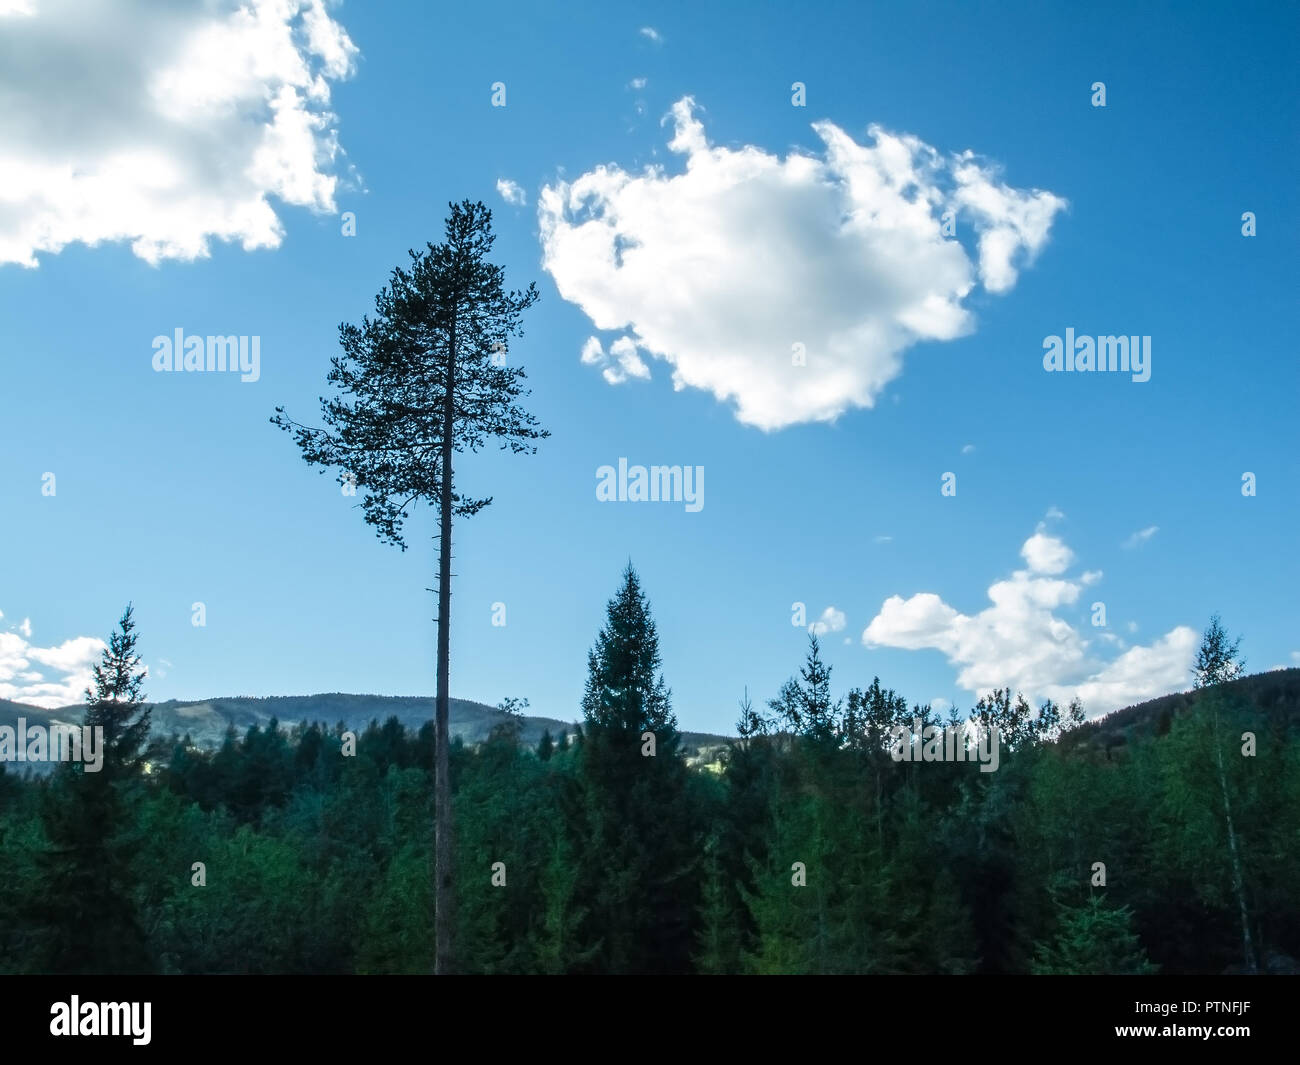 One high birch tree standing alone above many treetops of fir with mountains in far distance Stock Photo